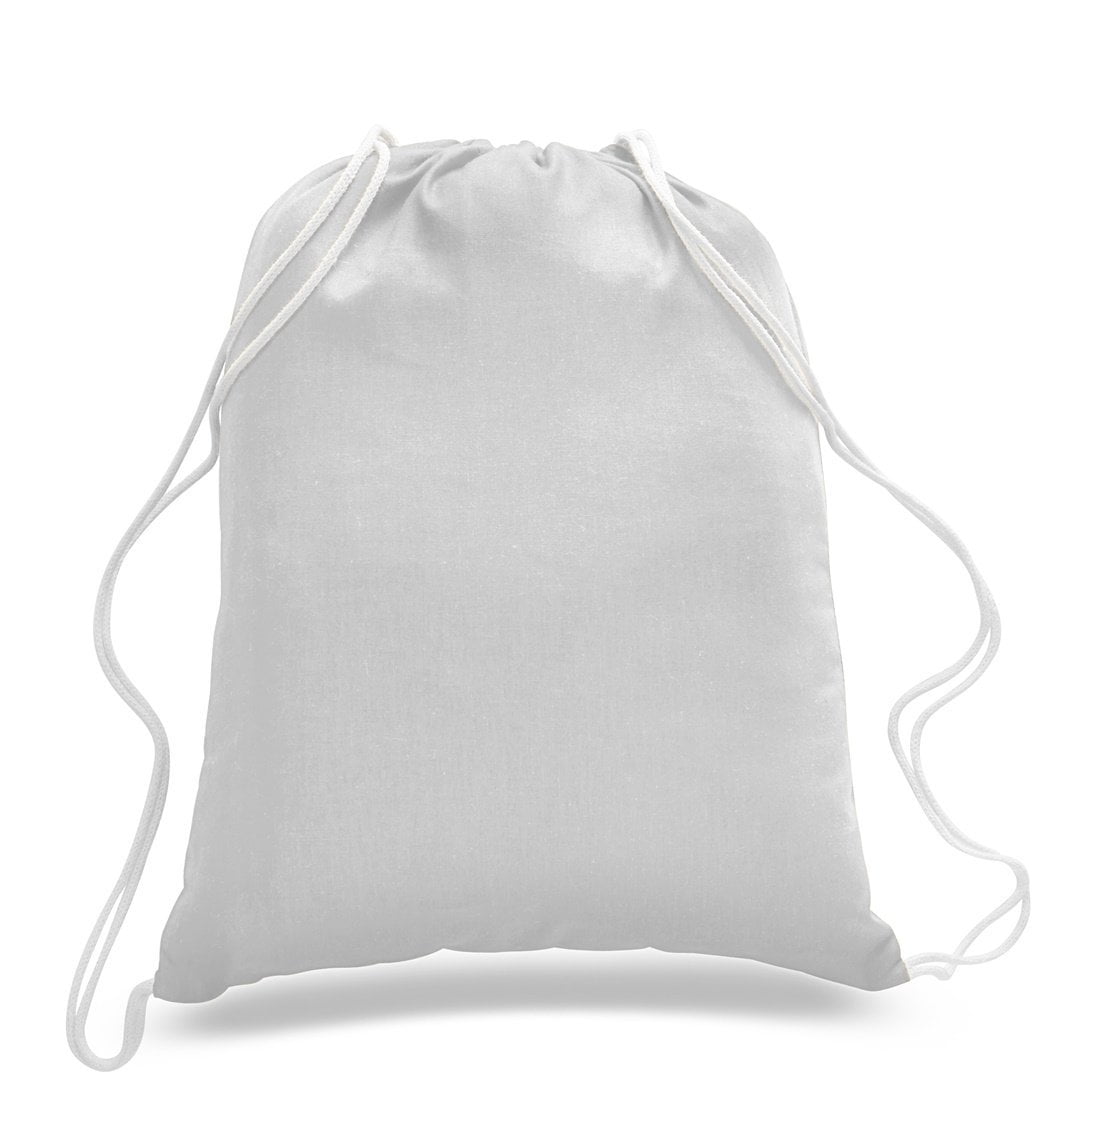 Cotton Drawstring Backpack - Textile Galactic 14 x 18 Inches 100% Canvas Drawstring Bags Pack of 6 | 12 